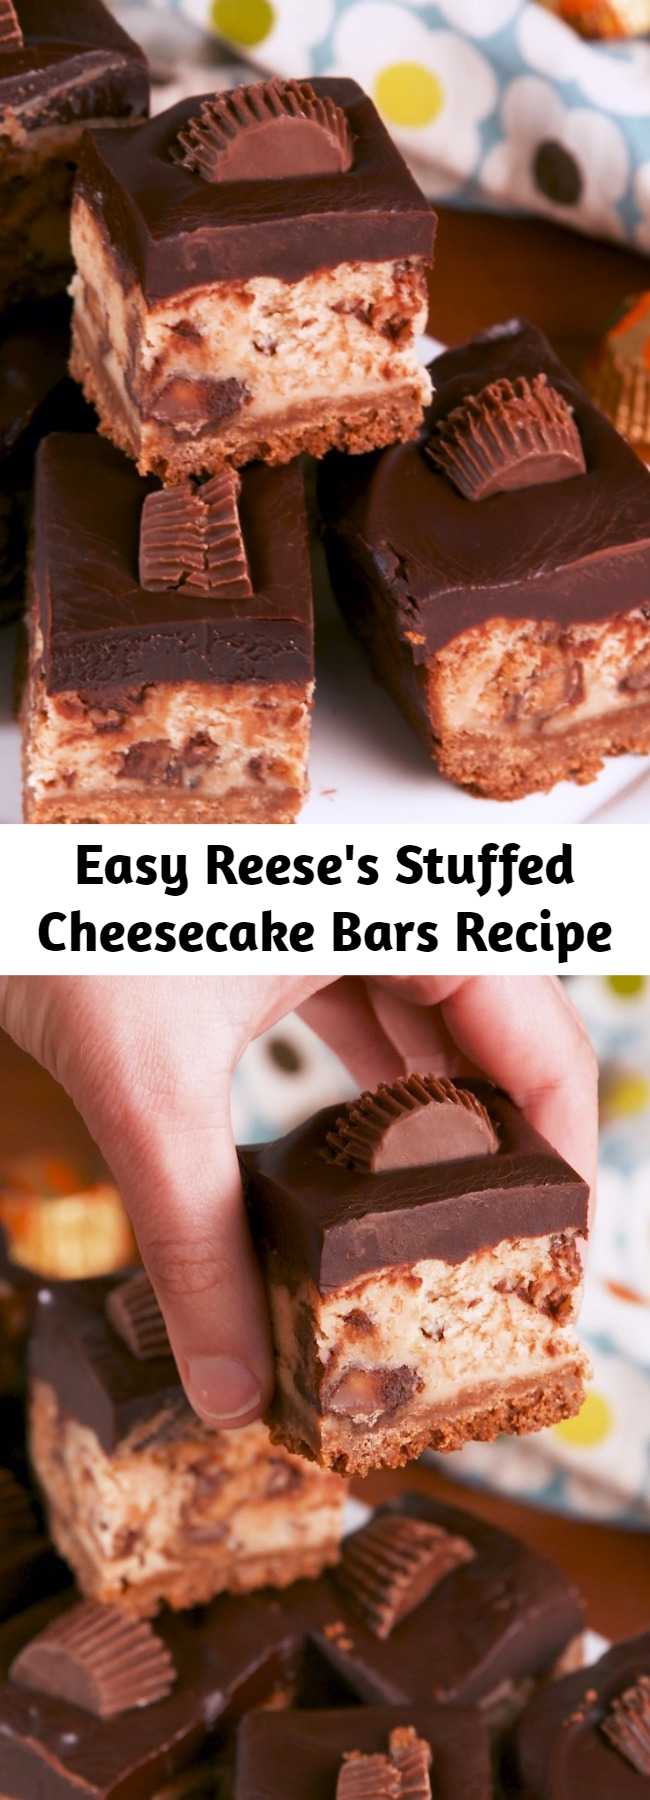 Easy Reese's Stuffed Cheesecake Bars Recipe - No such thing as too much peanut butter. #food #baking #easyrecipe #dessert #ideas